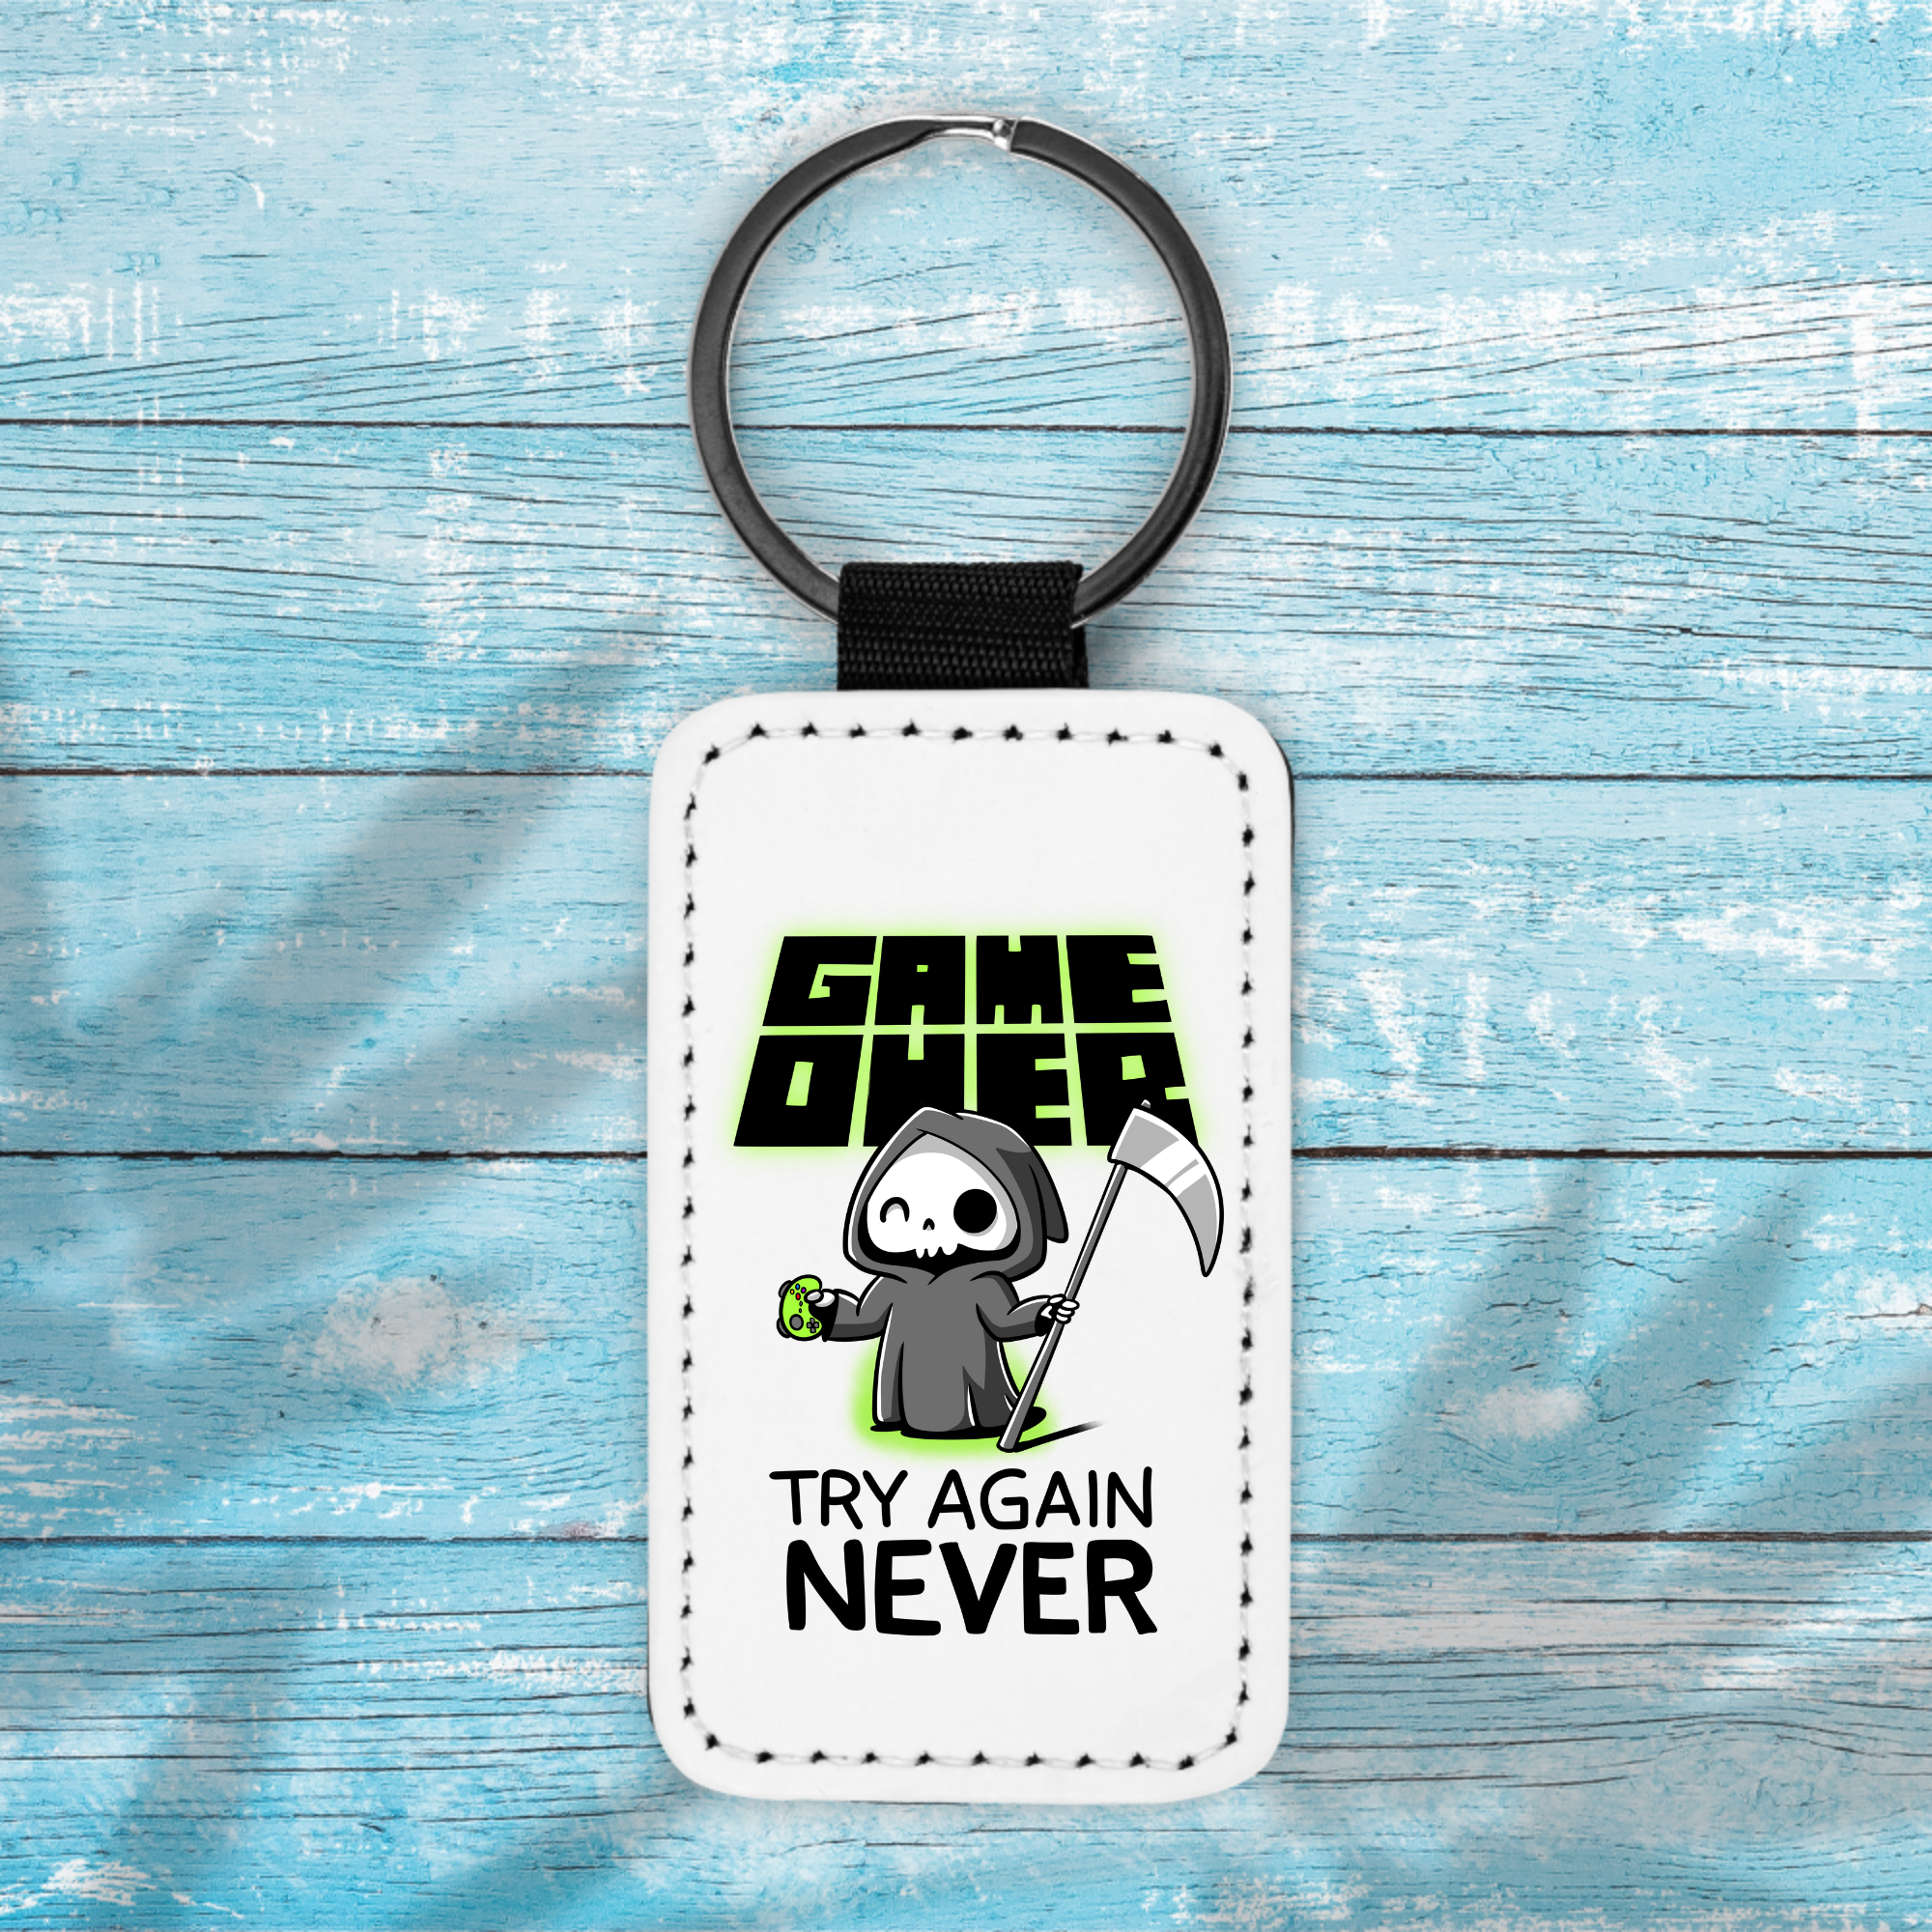 Game Over - Key Chain